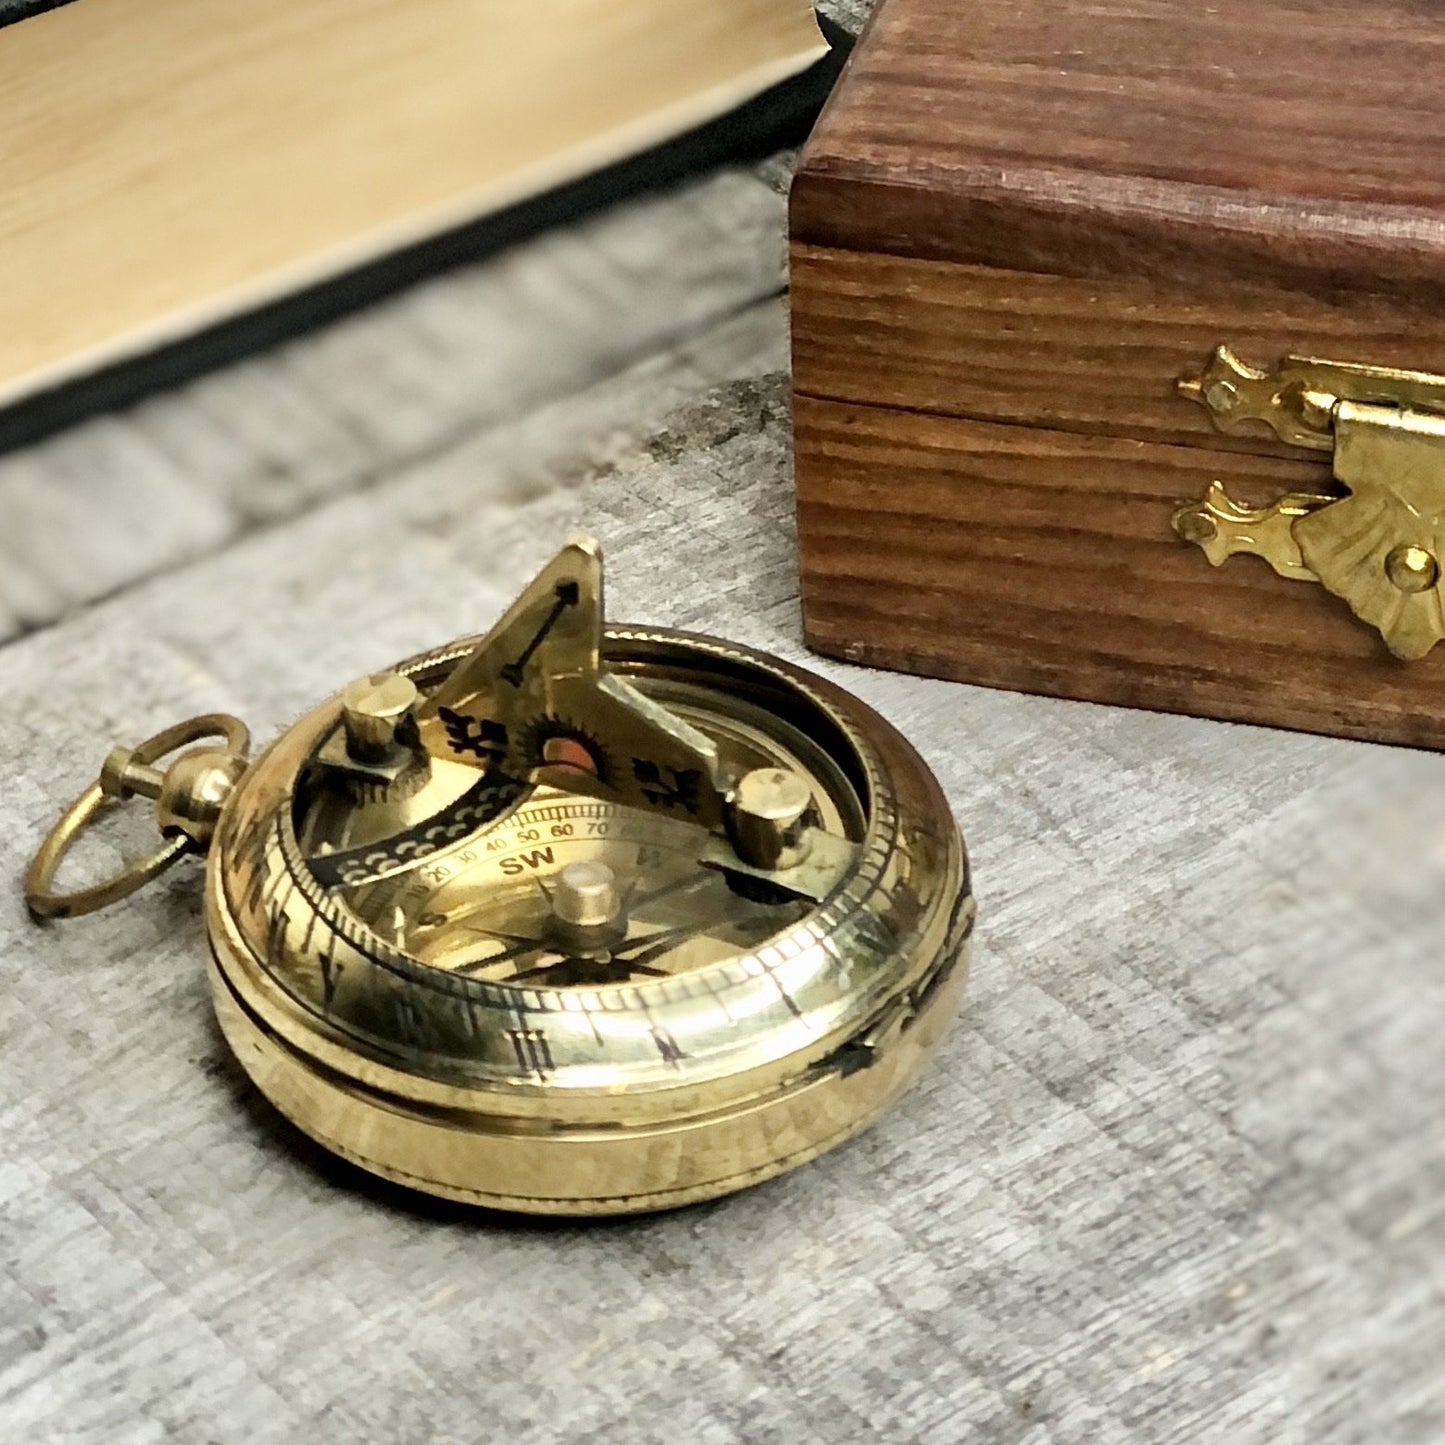 Antique brass compass, sundial and wooden box